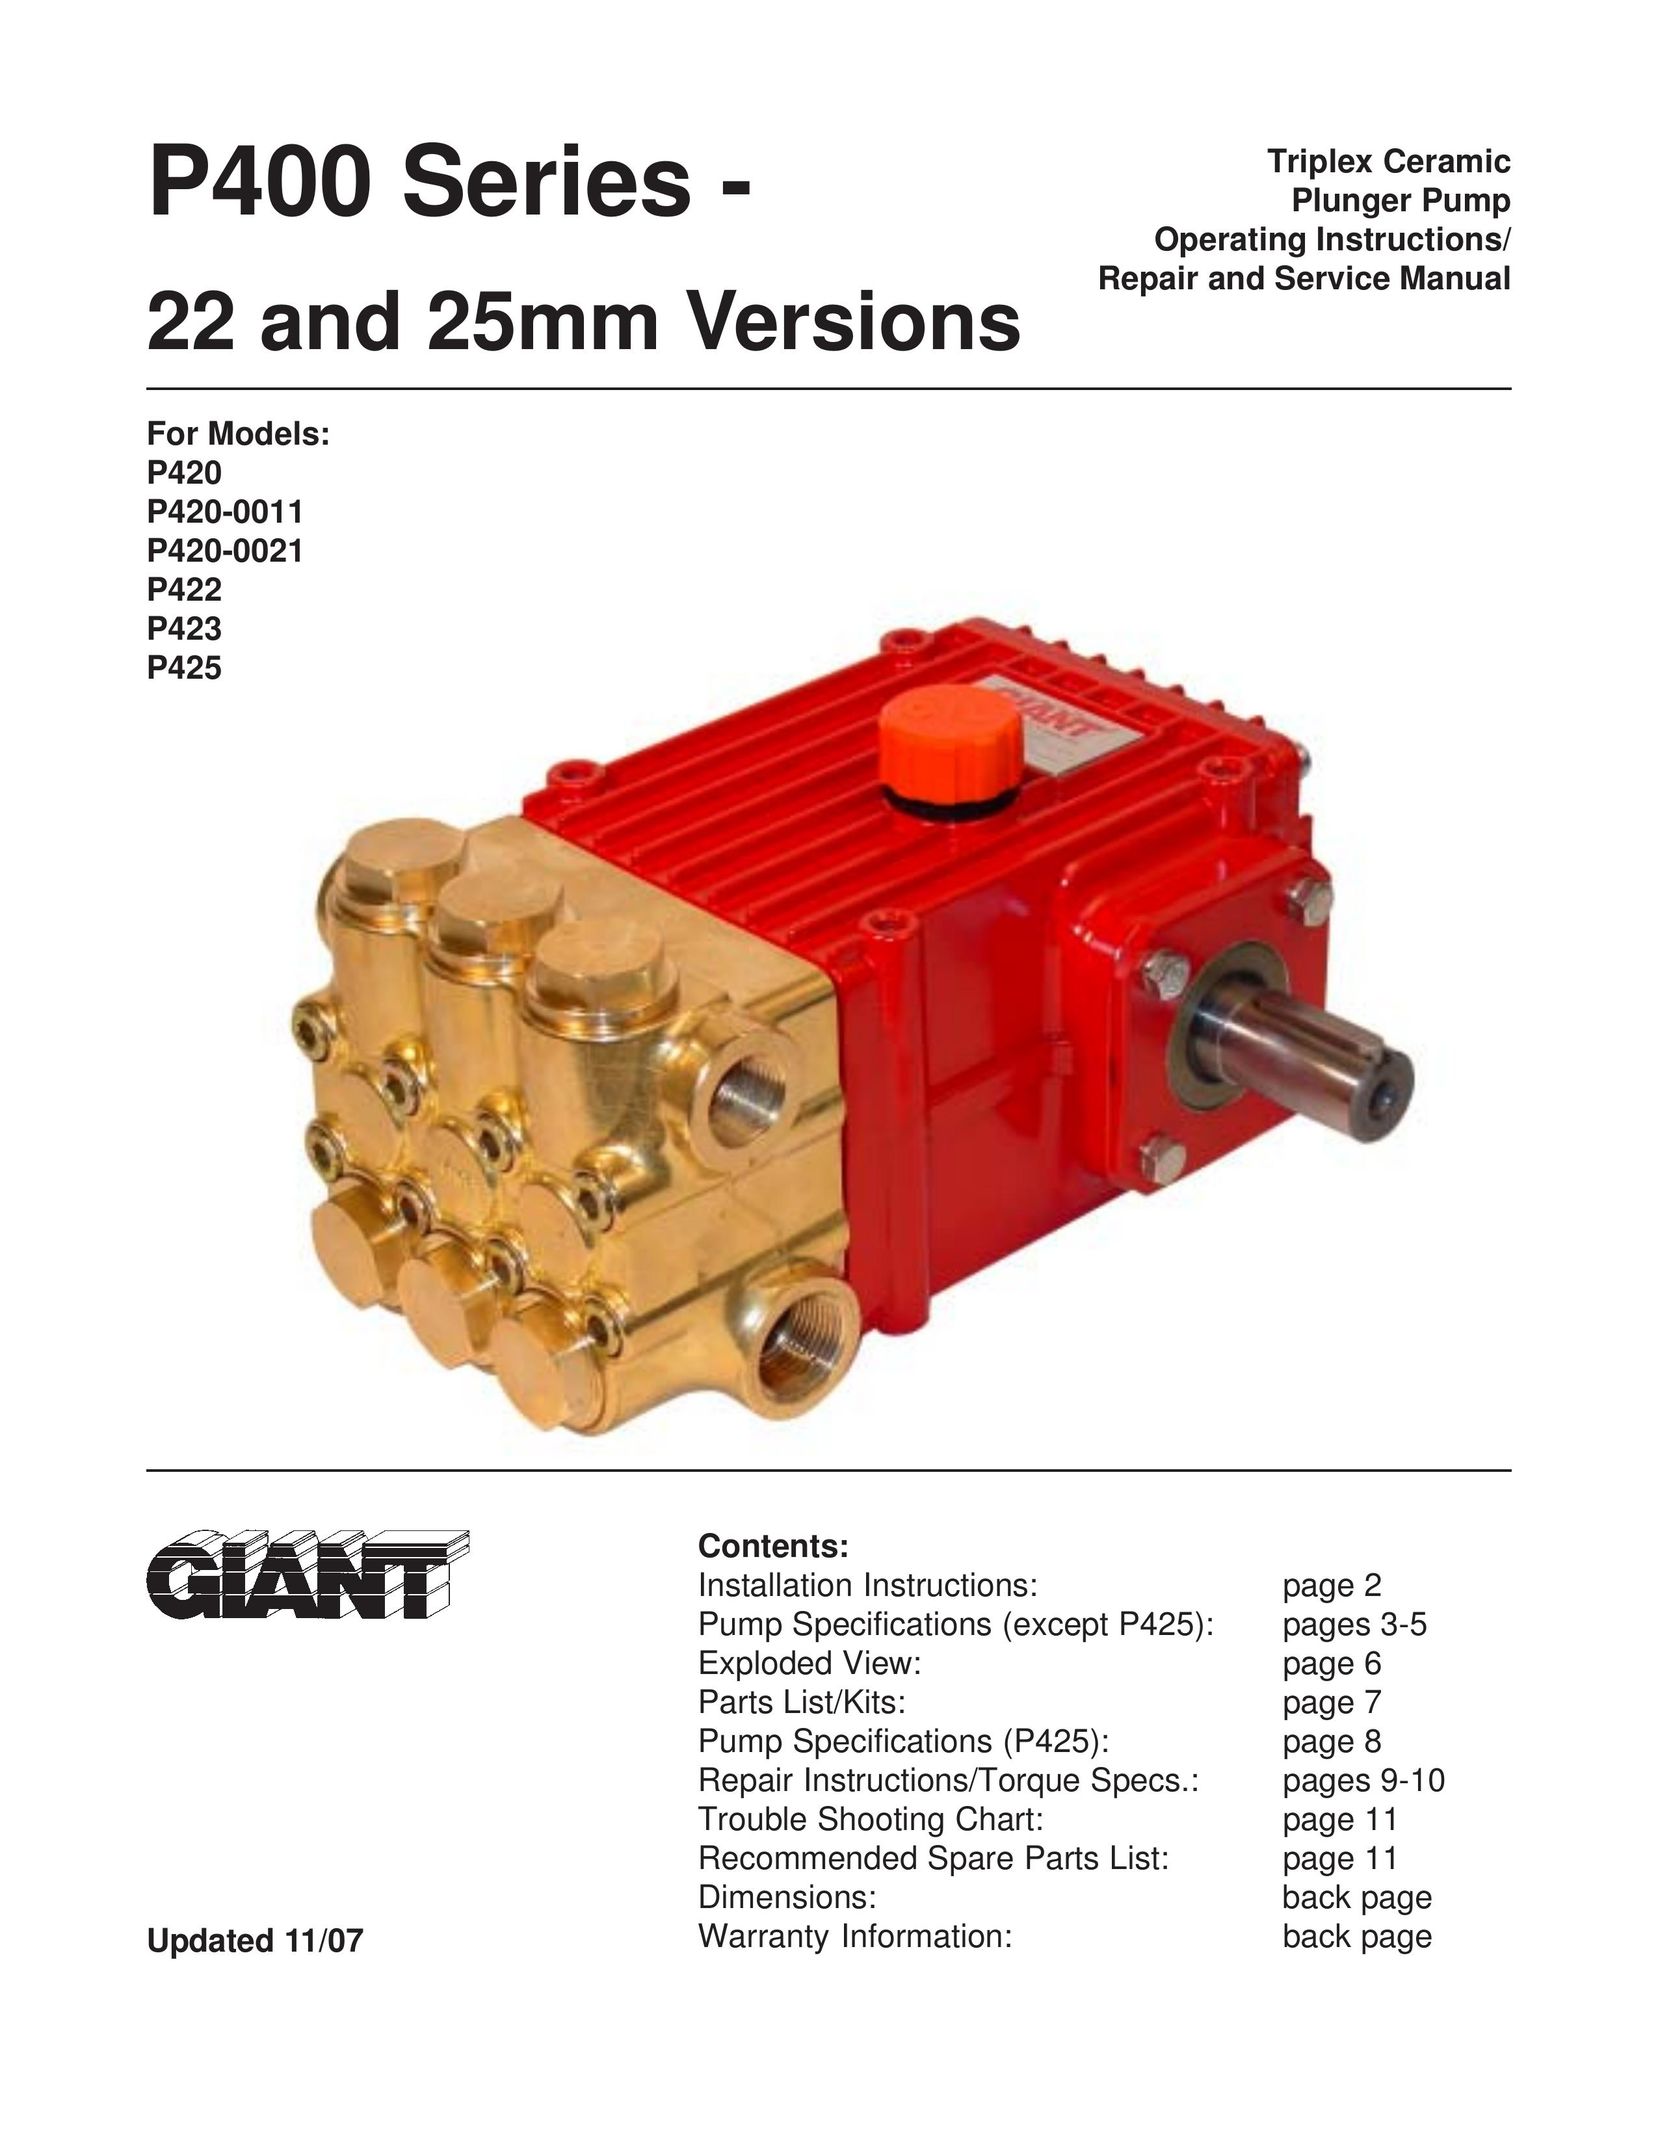 Giant P422 Septic System User Manual